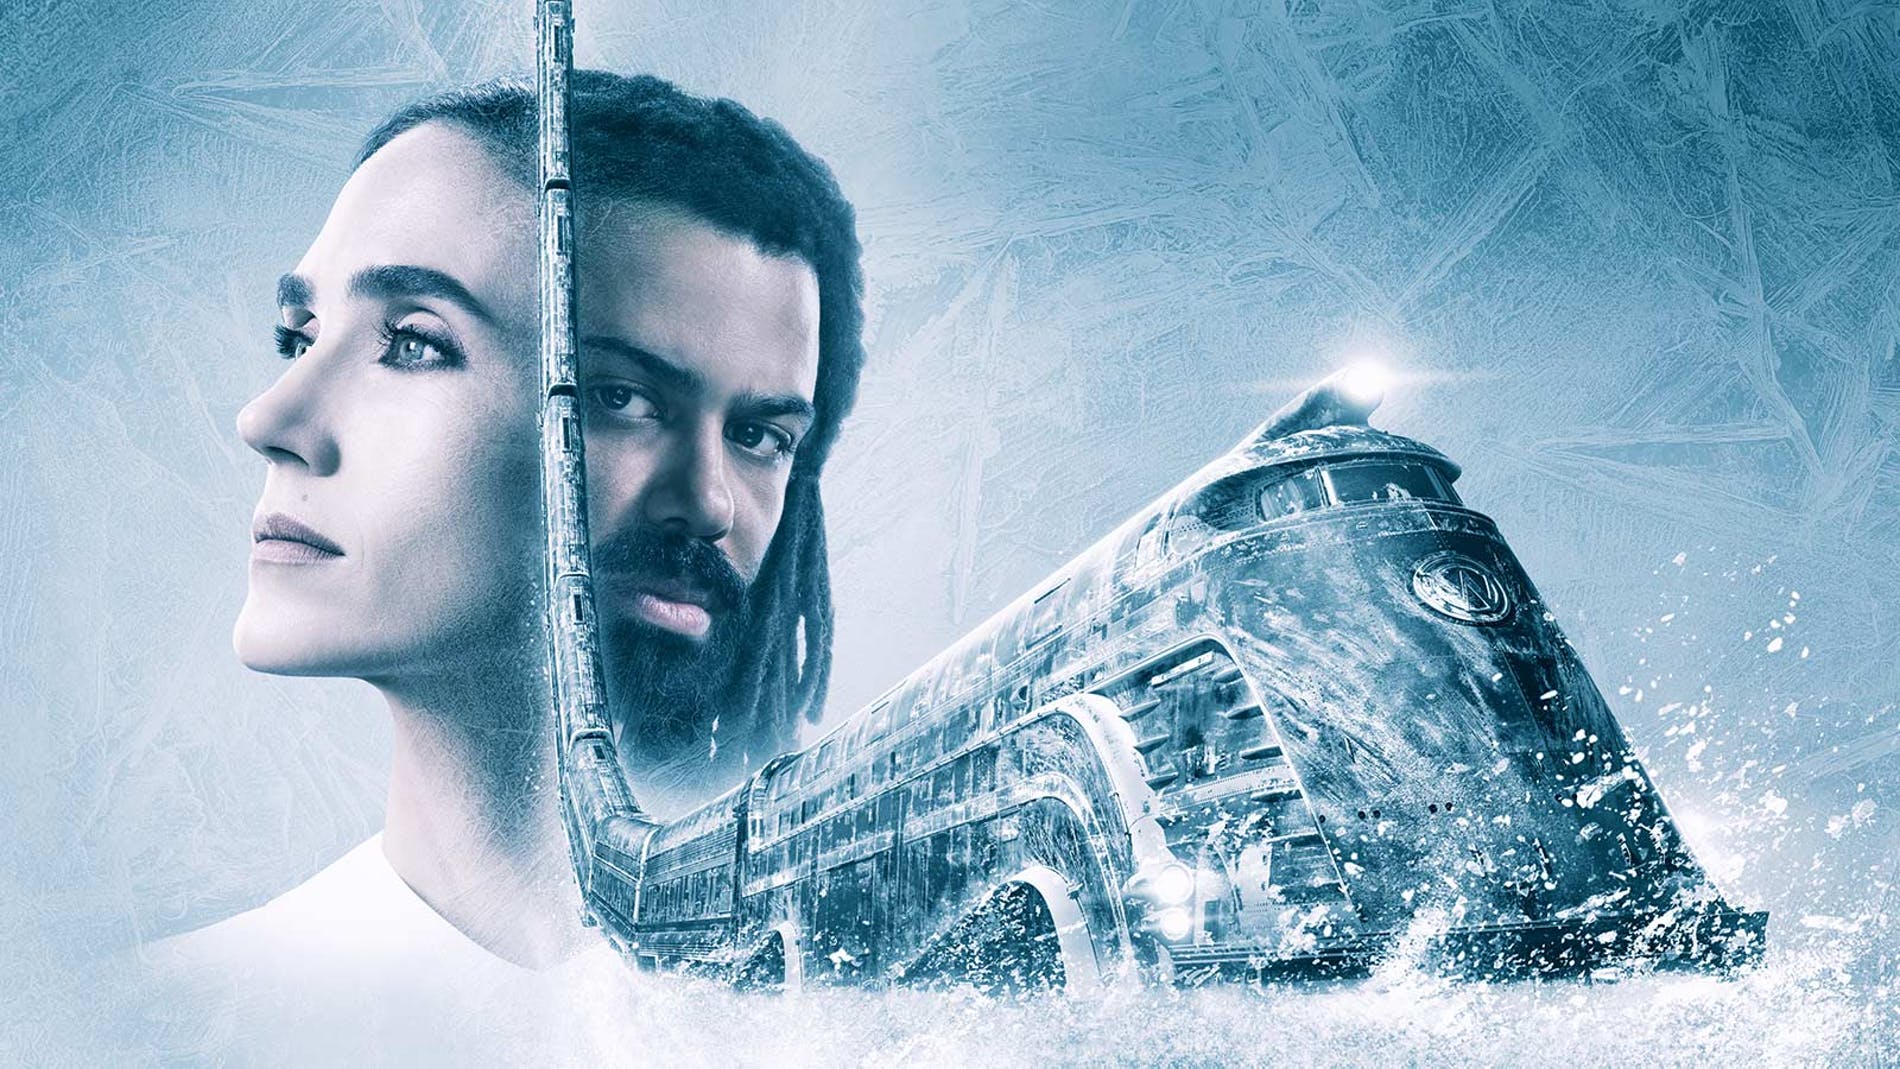 Season 2 of the horrific action movie Snowpiercer will be showing on Netflix soon